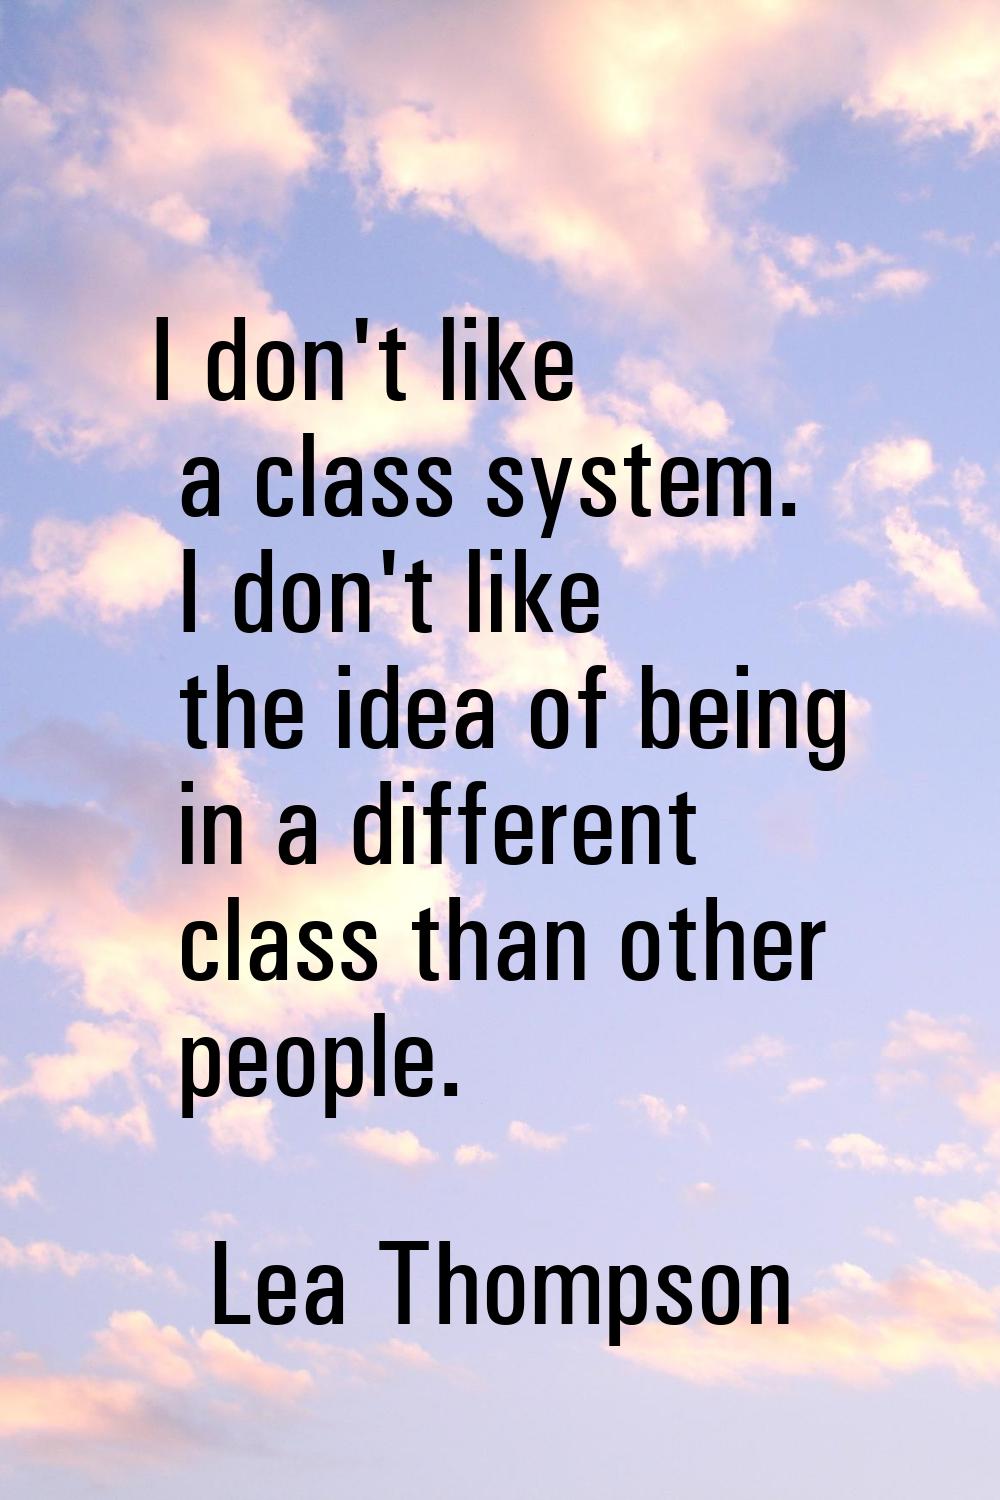 I don't like a class system. I don't like the idea of being in a different class than other people.